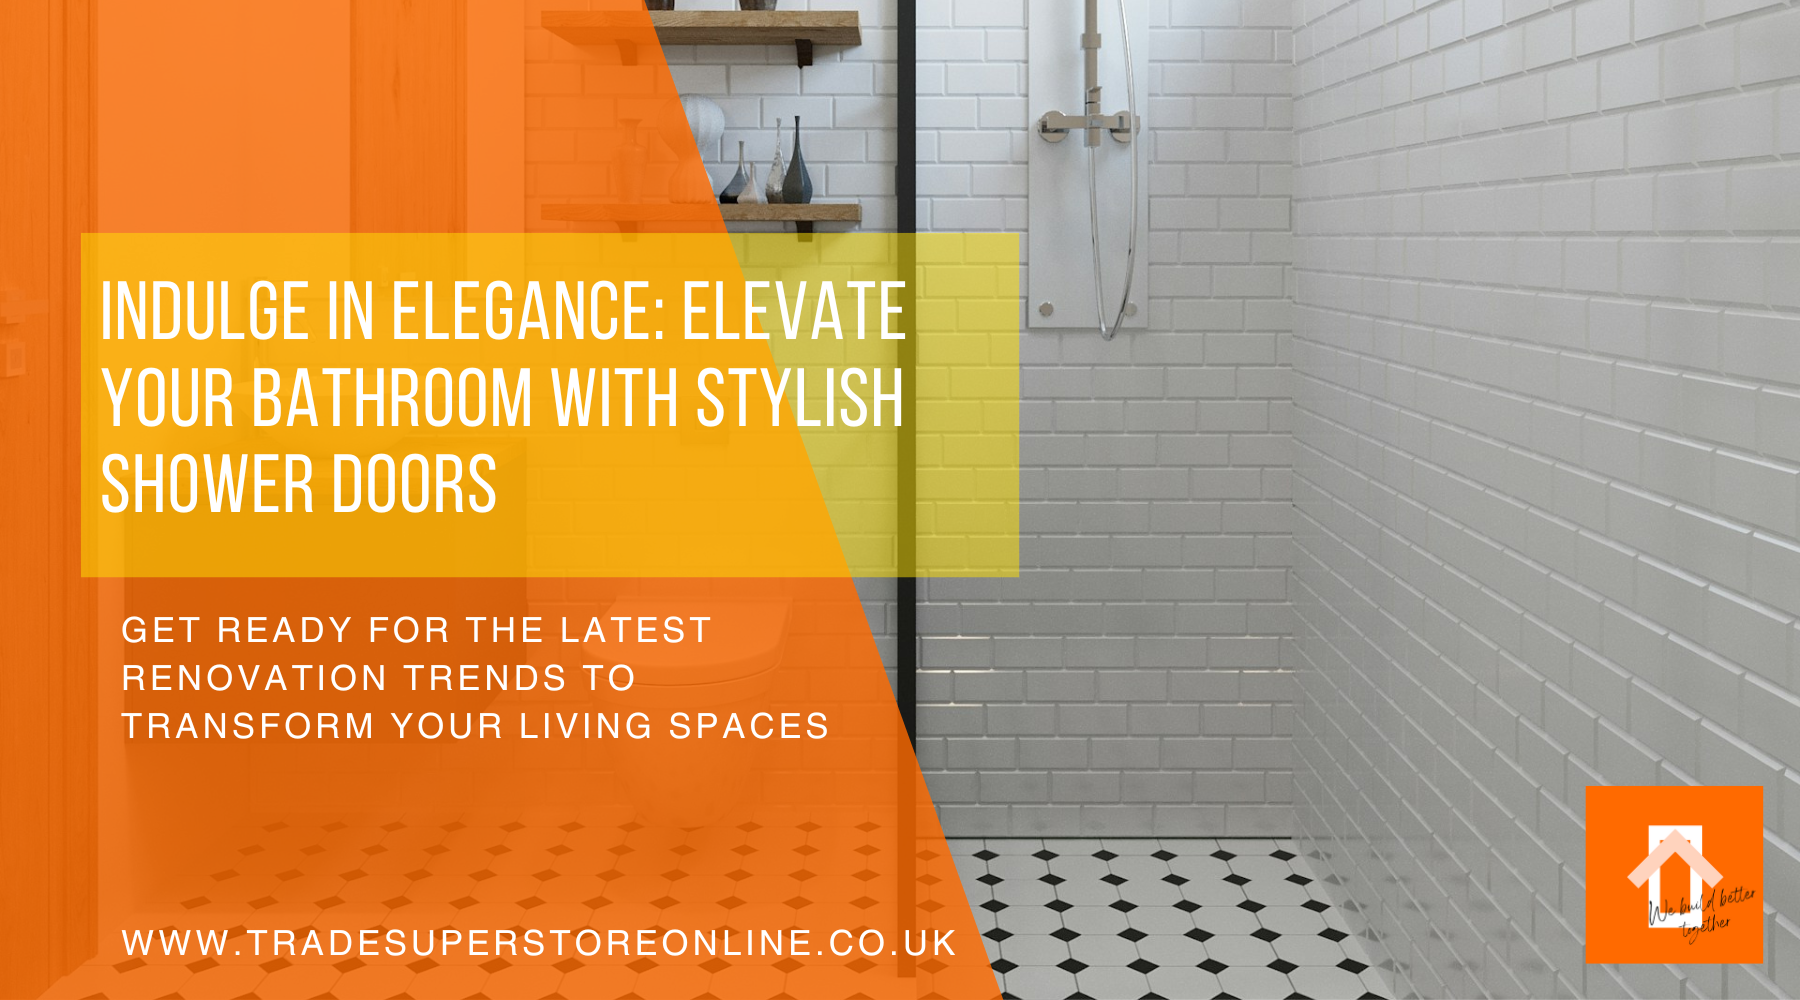 Indulge in Elegance: Elevate Your Bathroom With Stylish Shower Doors